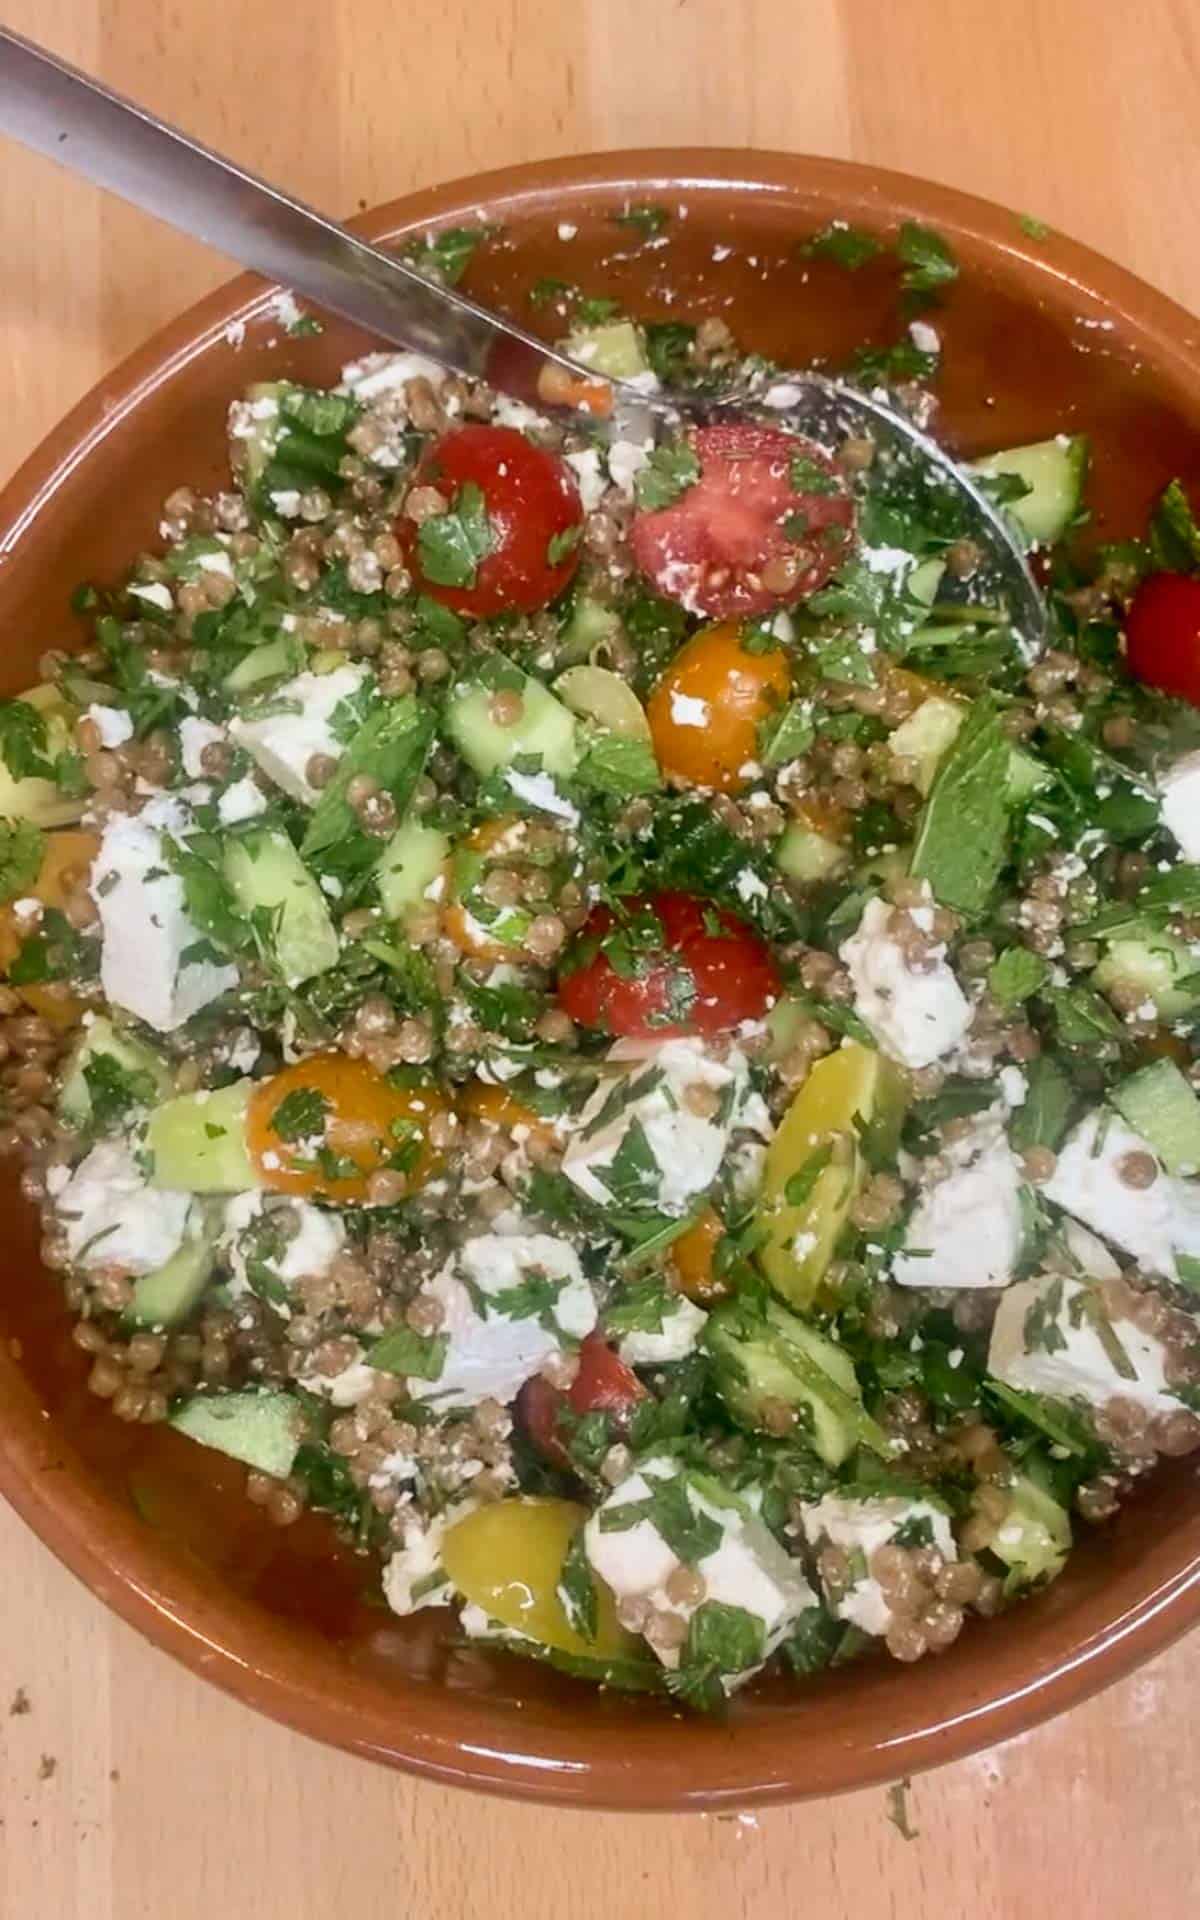 Couscous salad in a brown bowl